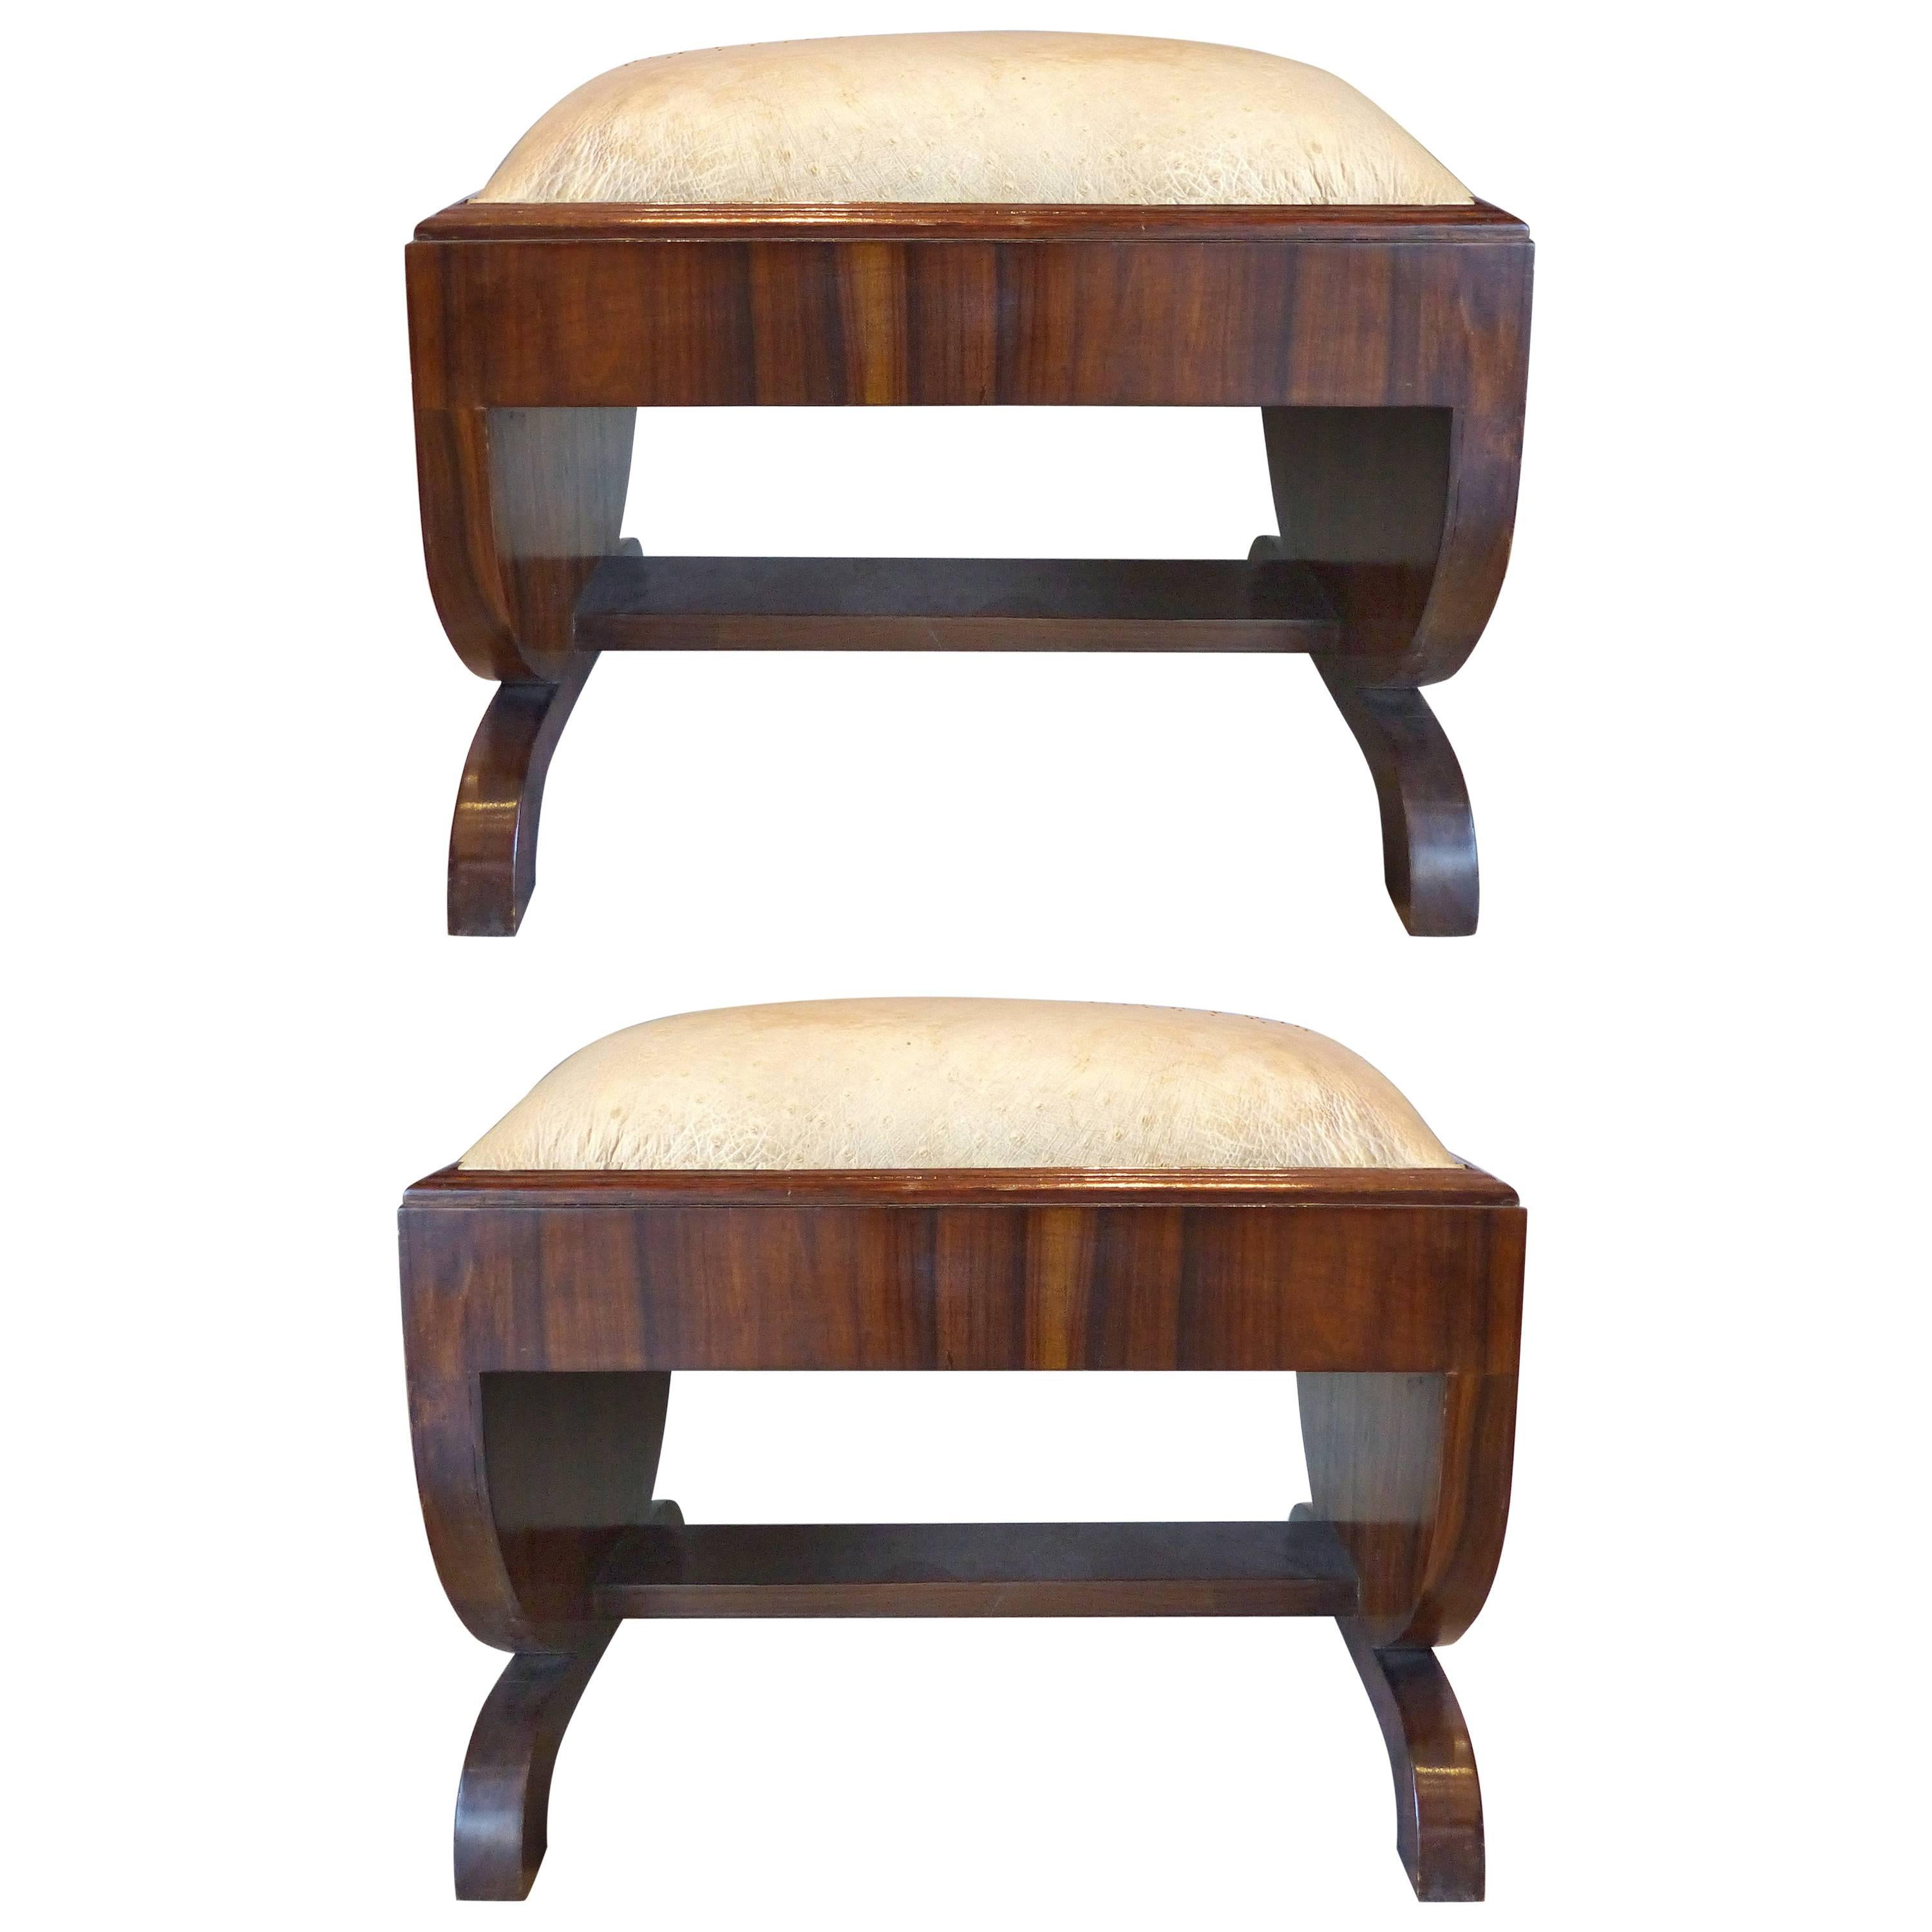 Art Deco Mahogany Footstools with Ostrich Skin Upholstery